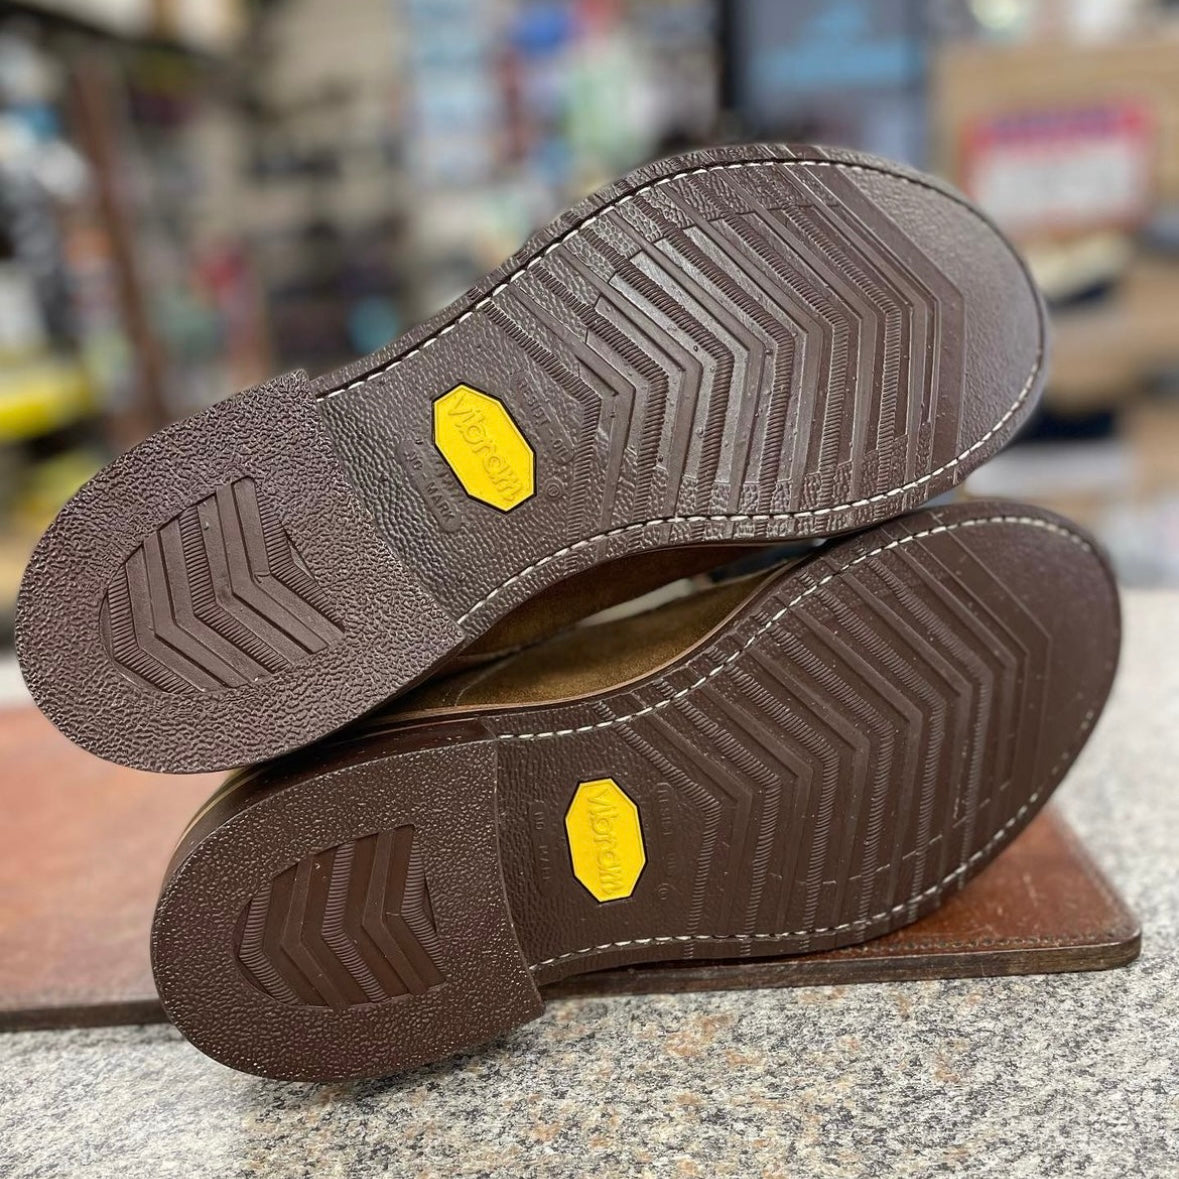 Vibram 700 Sole Package